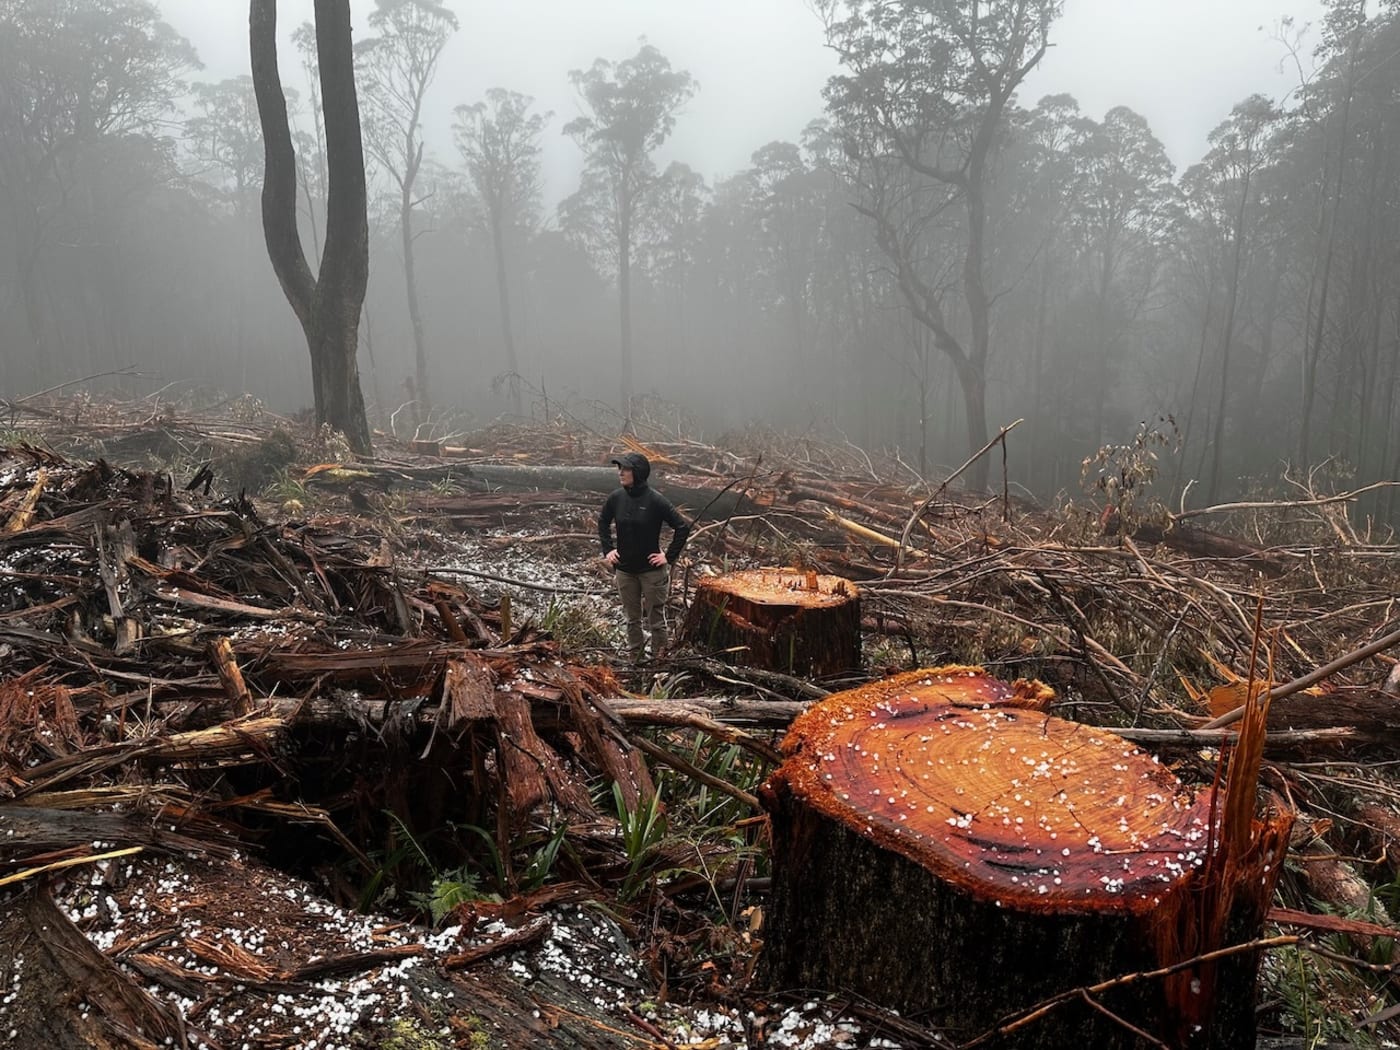 Dr Kita Ashman, Threatened Species and Climate Adaptation Ecologist for WWF-Australia, surveys the destruction in Tallaganda State Forest.